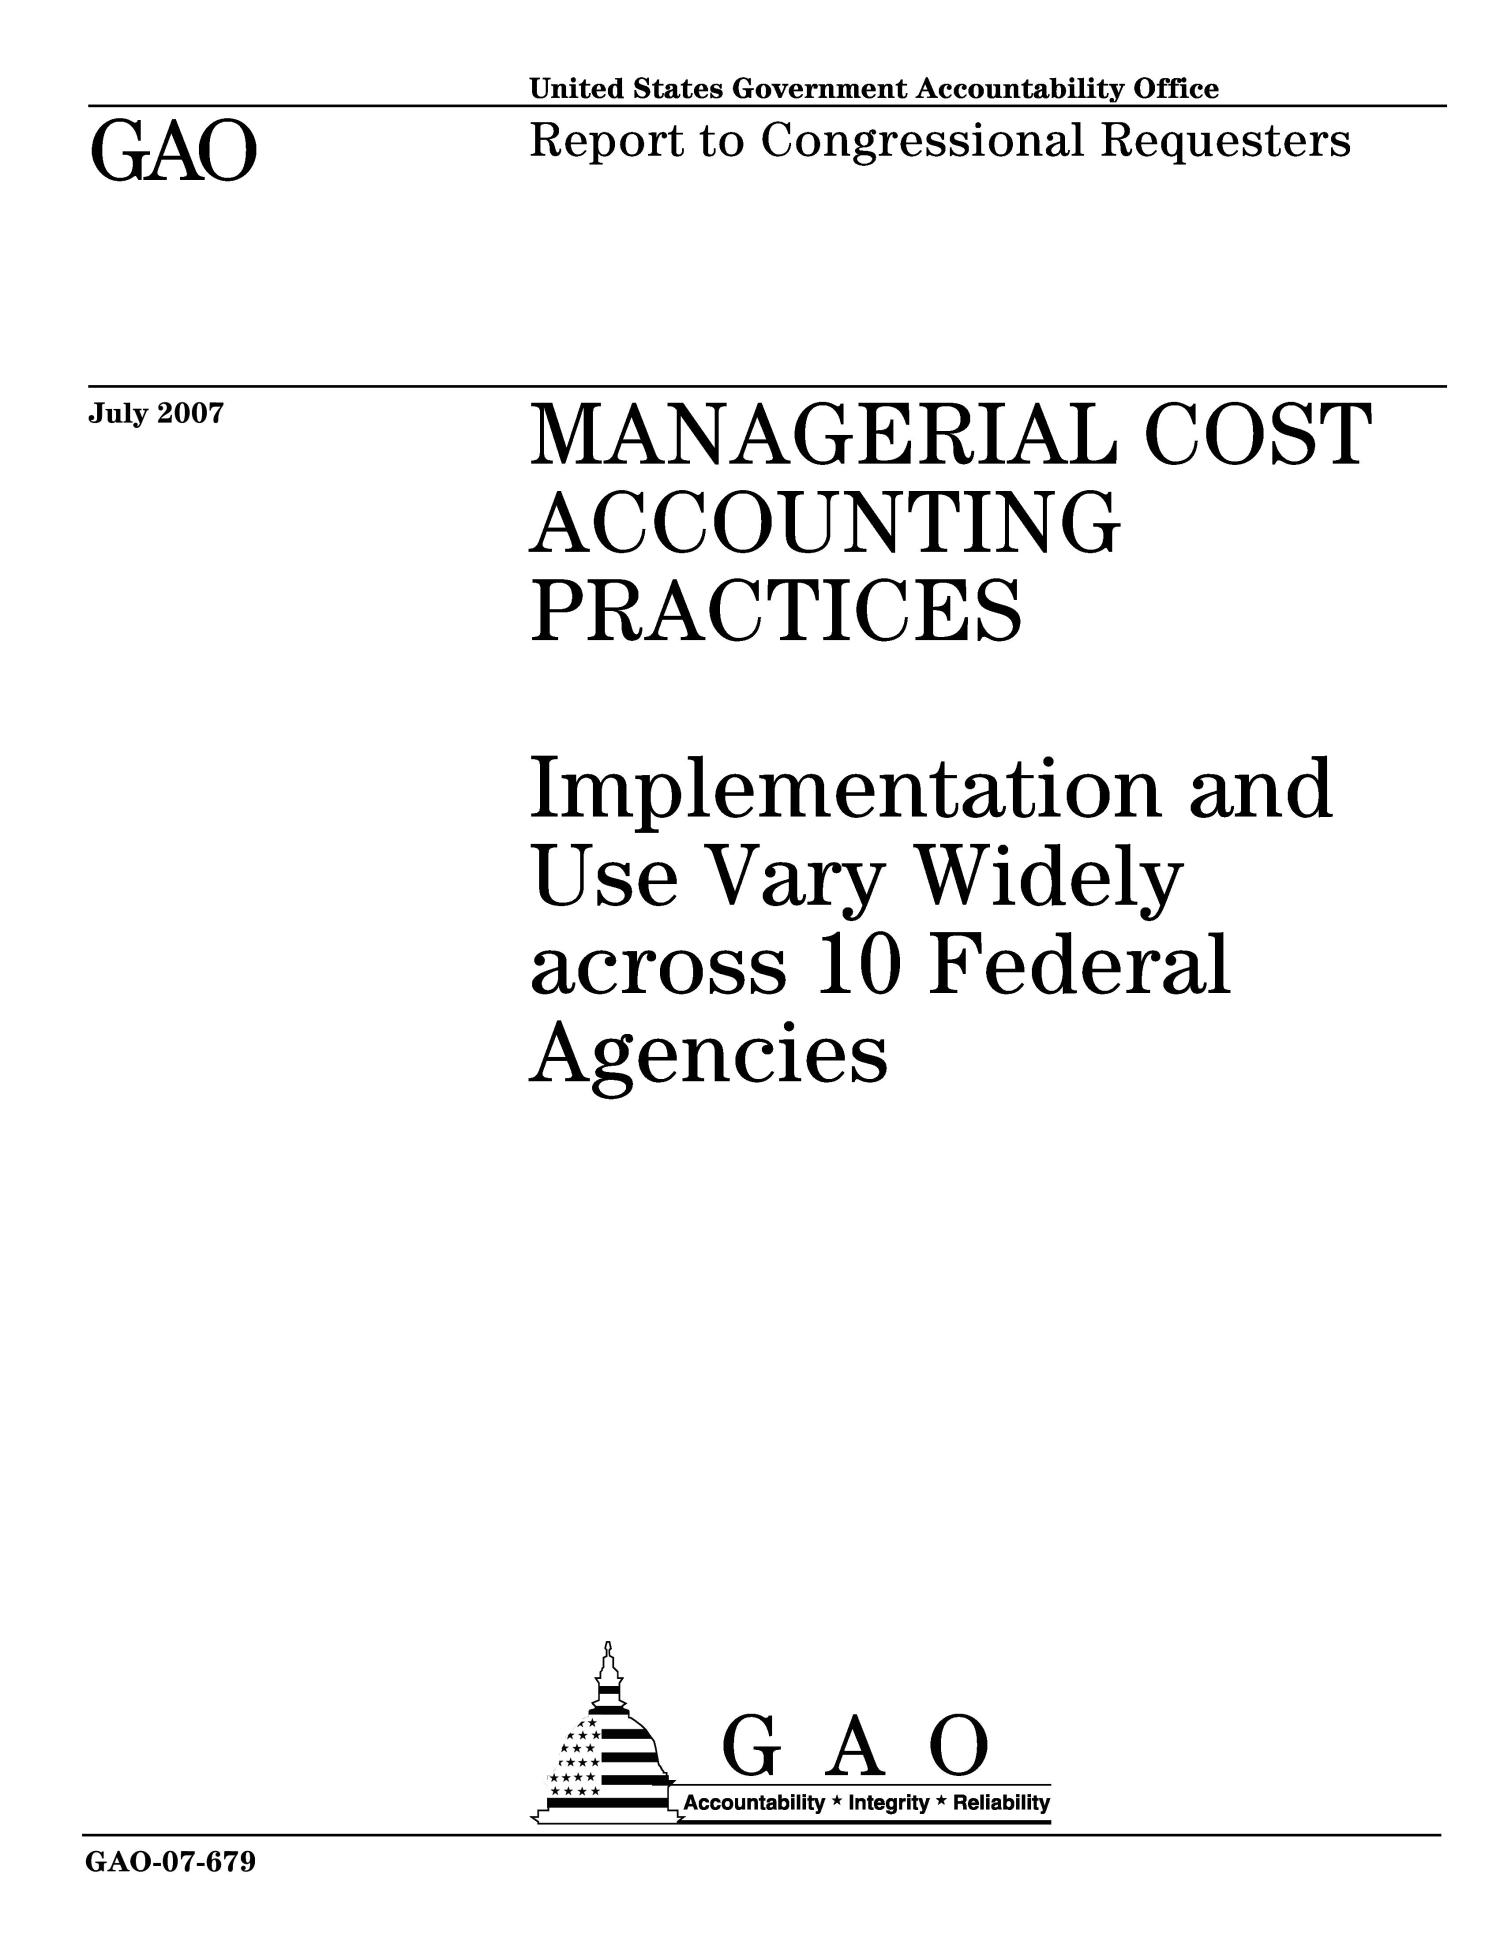 Managerial Cost Accounting Practices: Implementation and Use Vary Widely across 10 Federal Agencies
                                                
                                                    [Sequence #]: 1 of 37
                                                